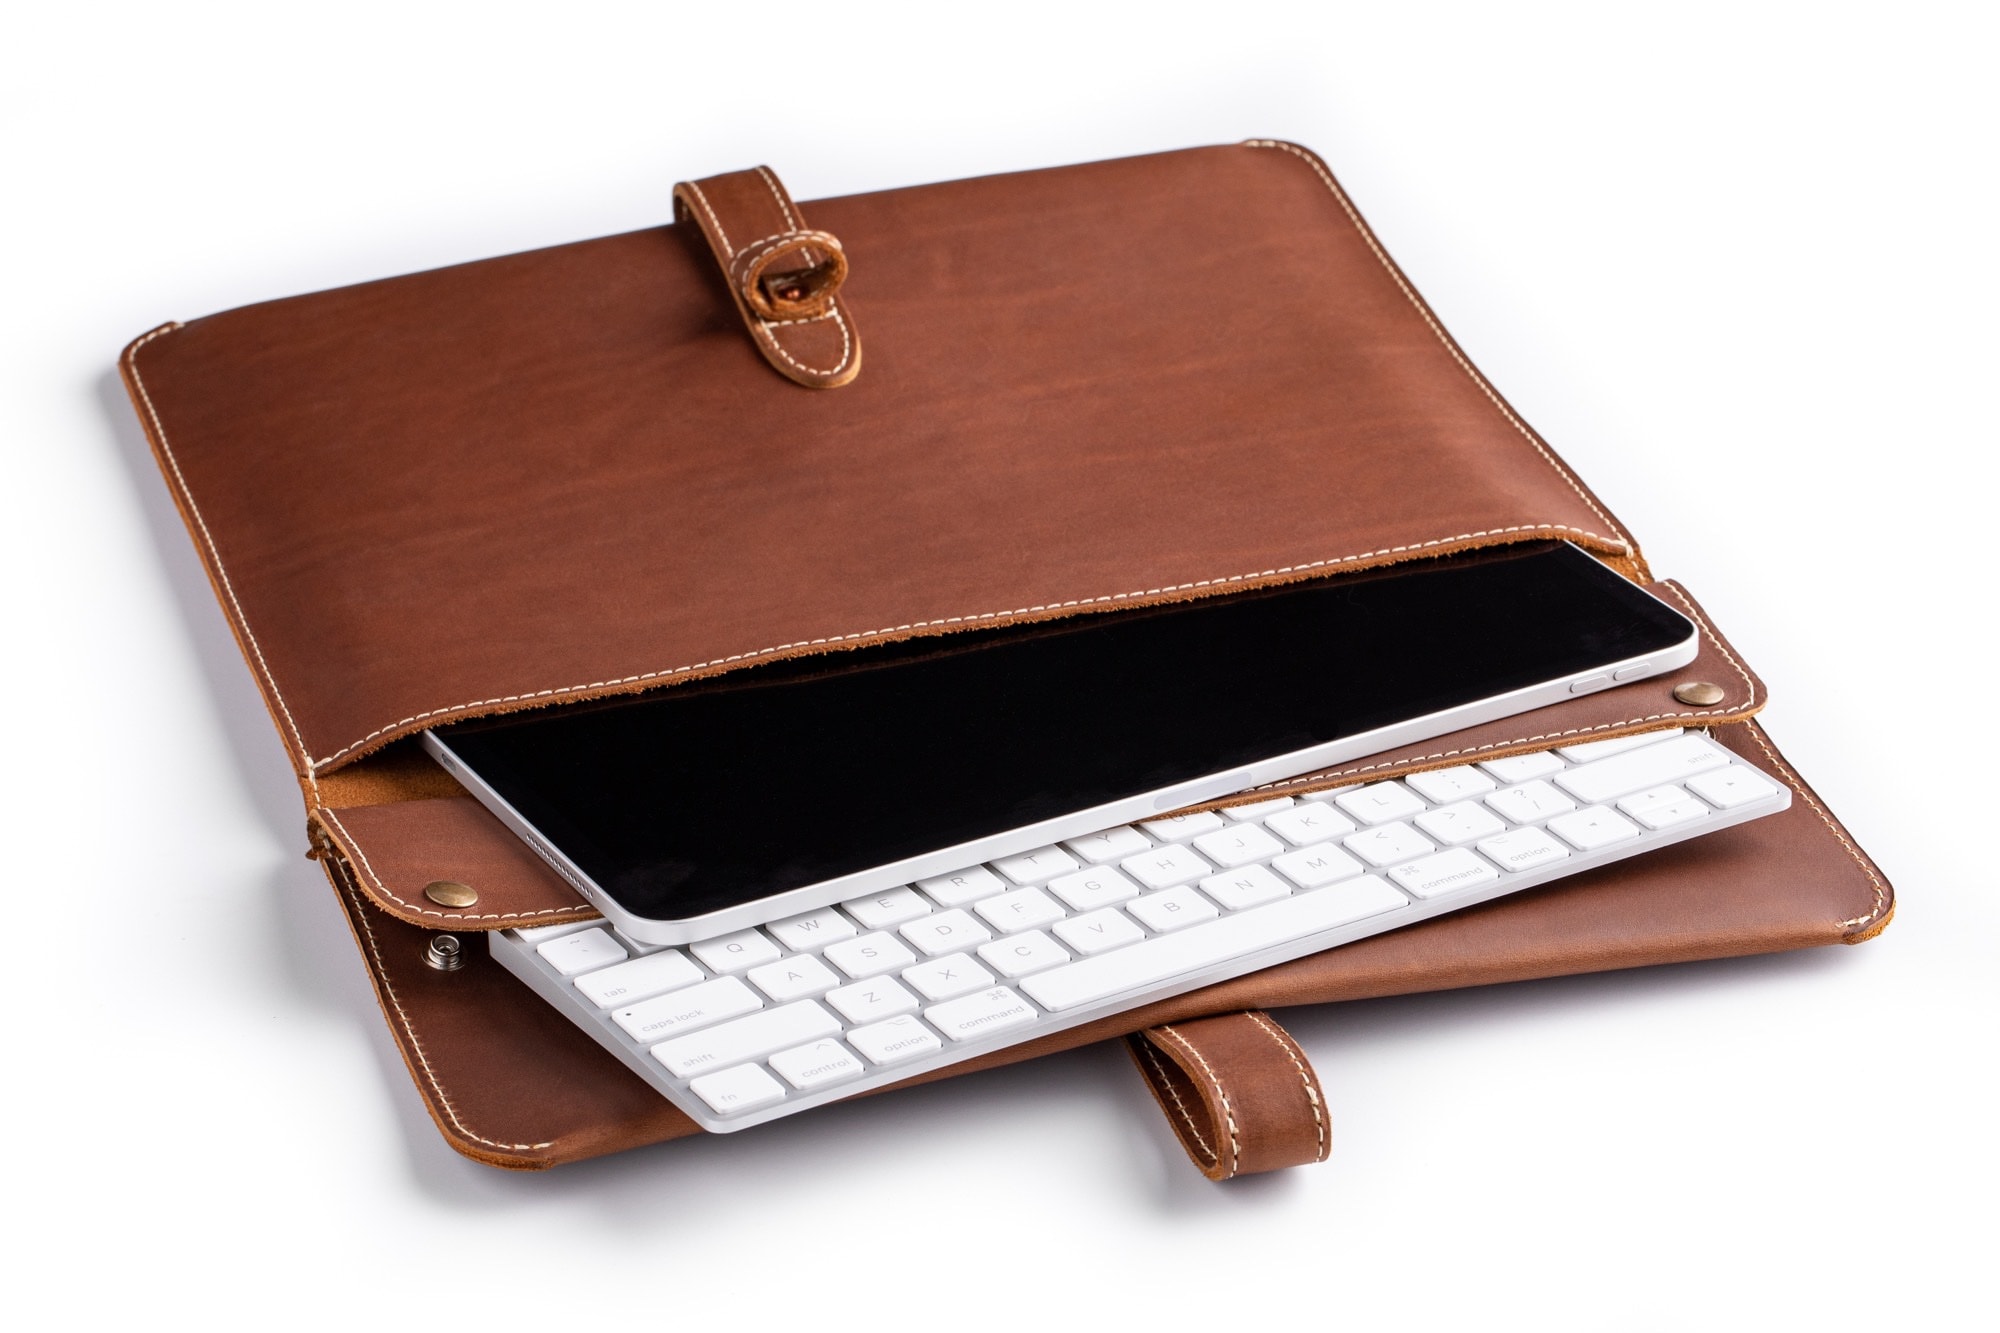 The Pad & Quill Oxford iPad Sleeve offers plenty of storage space.